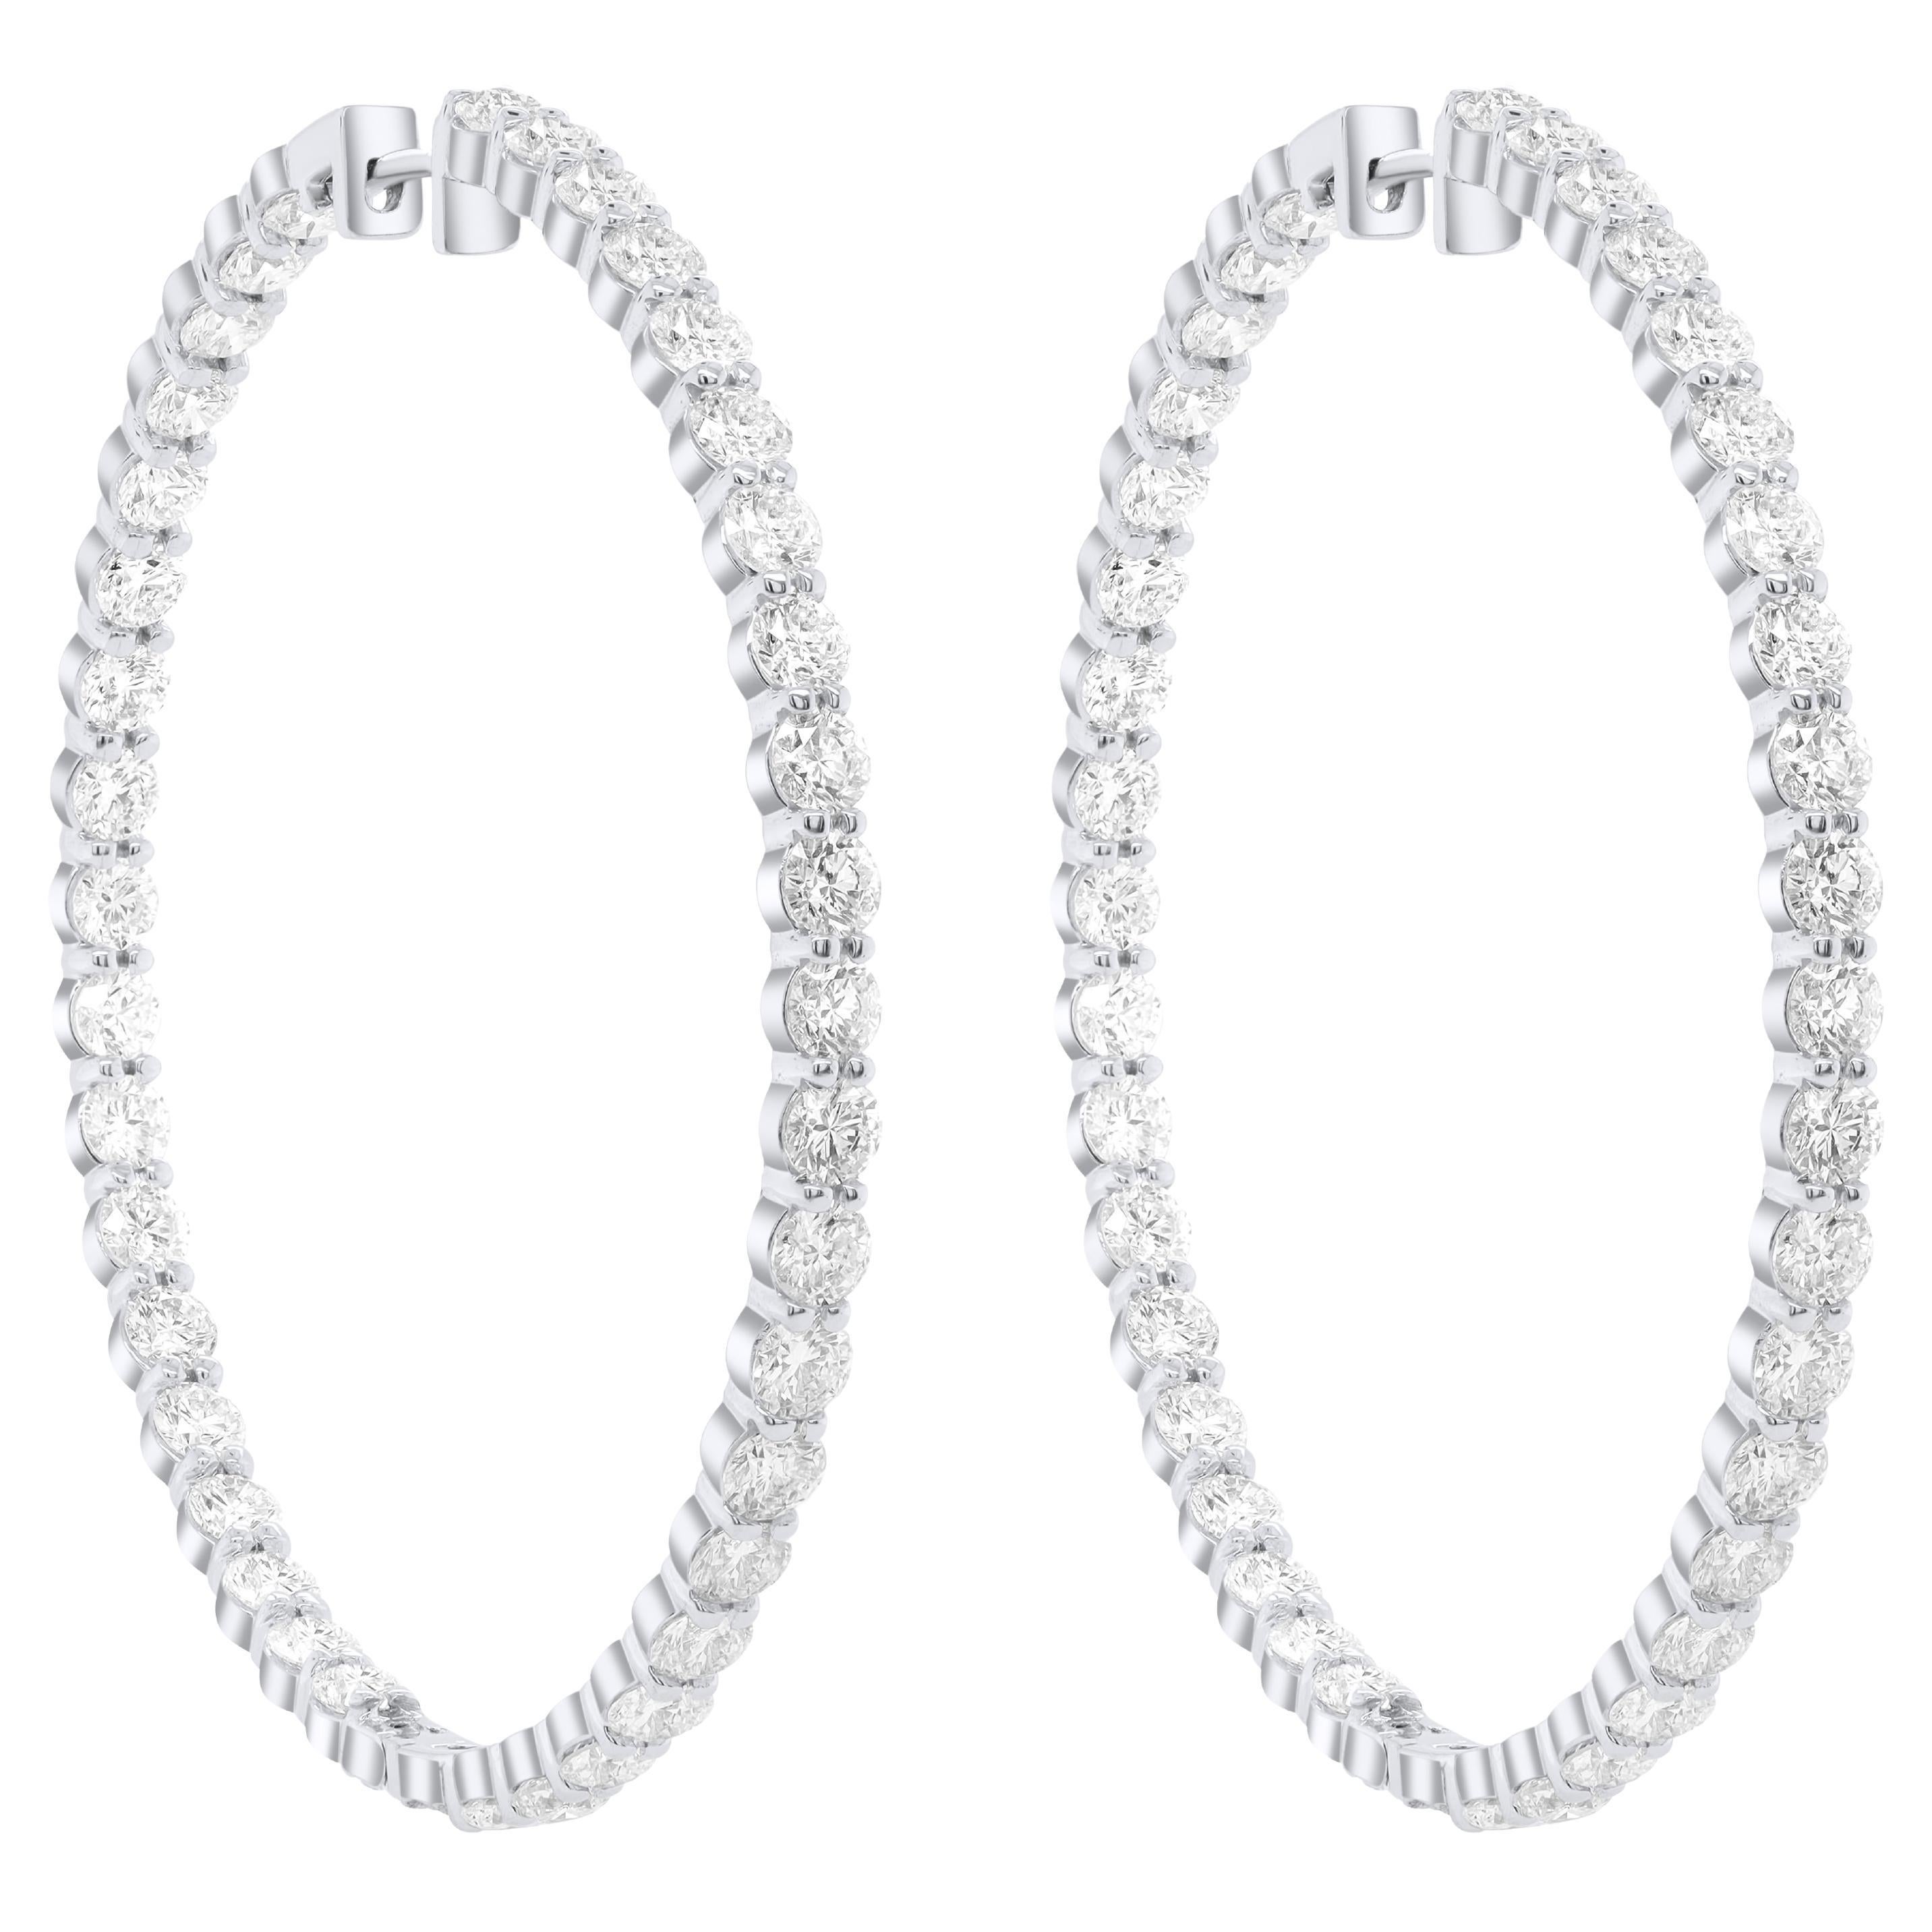 Diana M.18 kt white gold, 2.50" inside-out hoop earrings adorned with 19.00 cts 